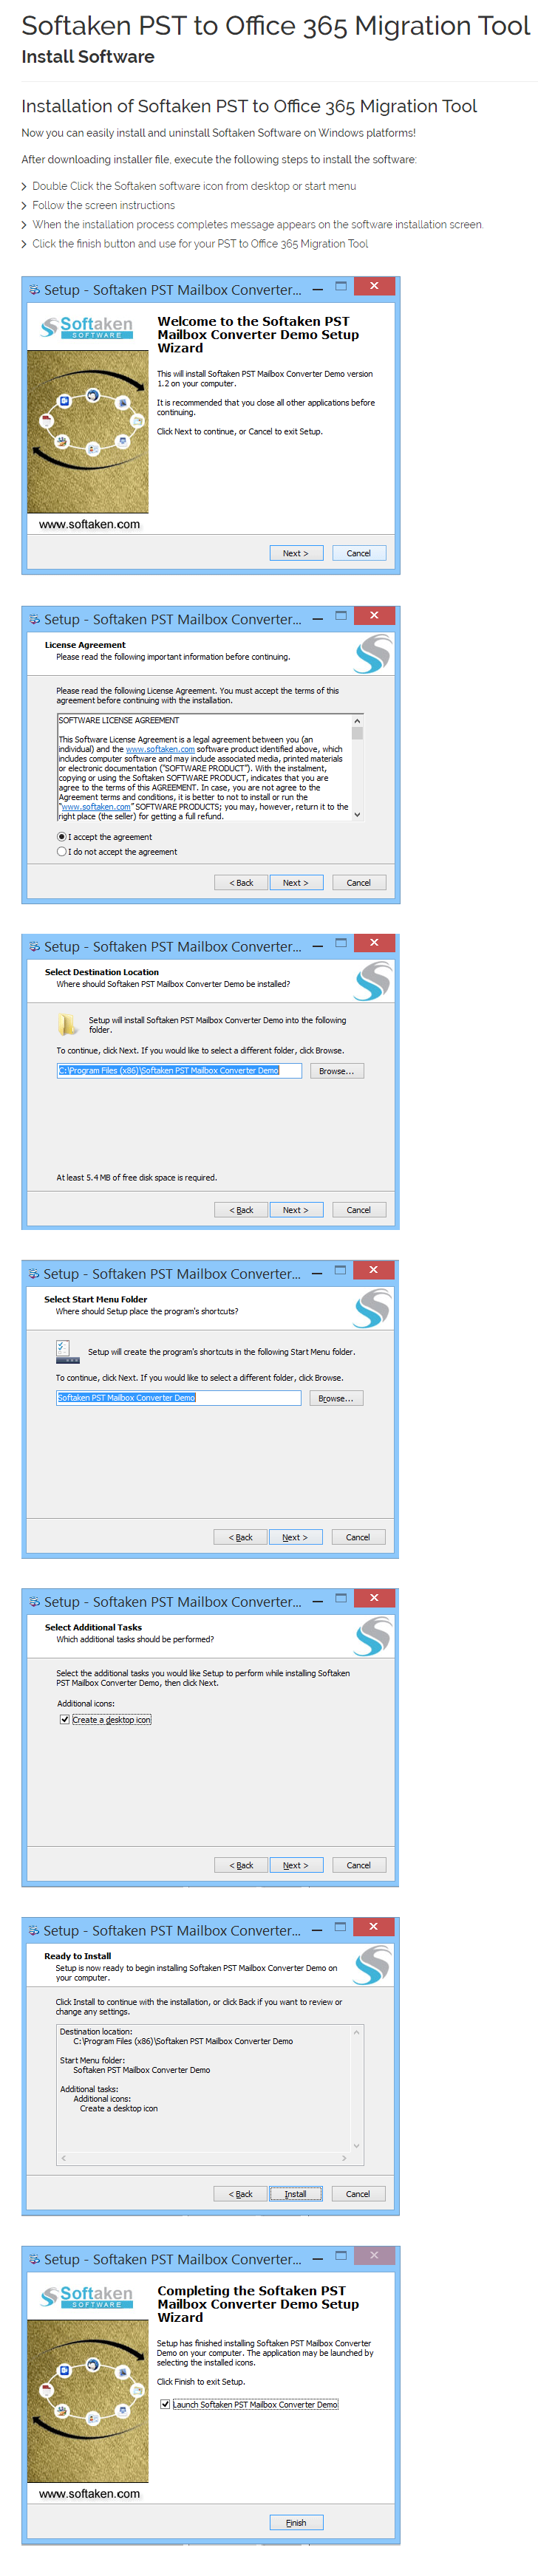 PST to Office 365 Installation